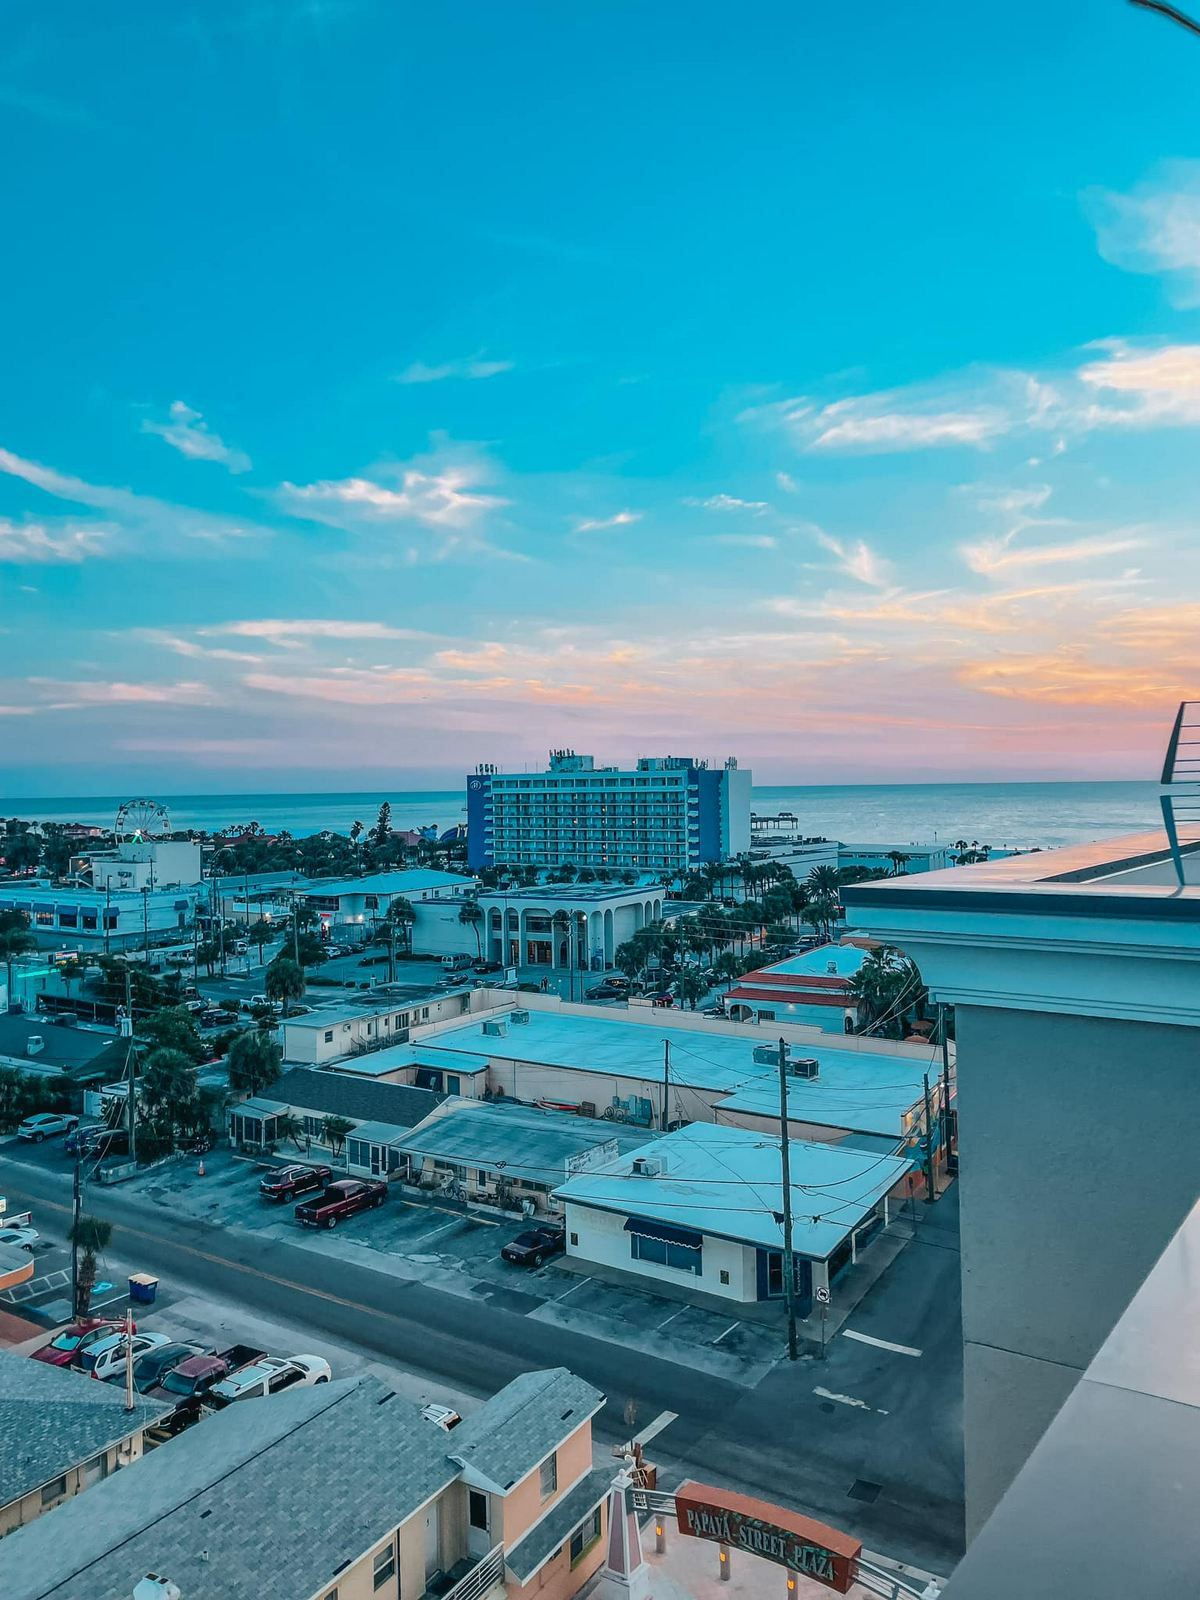 Clearwater Beach sunset views from Vue 360 rooftop bar